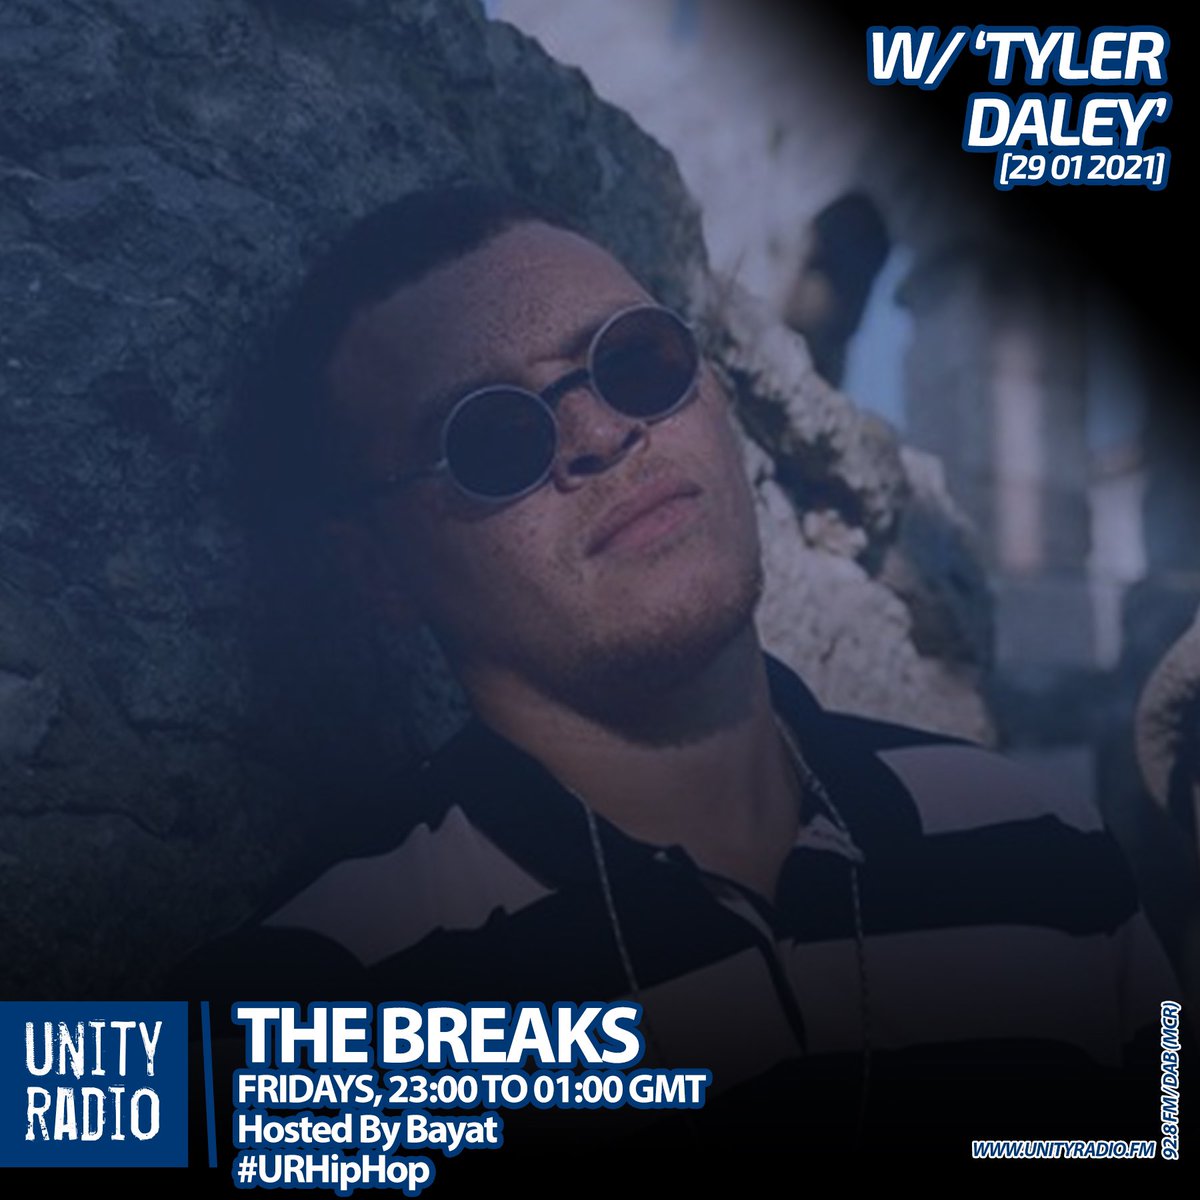 Tonight at 11PM #TheBreaks hosted by @JamesBayat are joined by @TylerDaleyUK to talk new music, new coz album and more. #UnityRadio #URHipHop